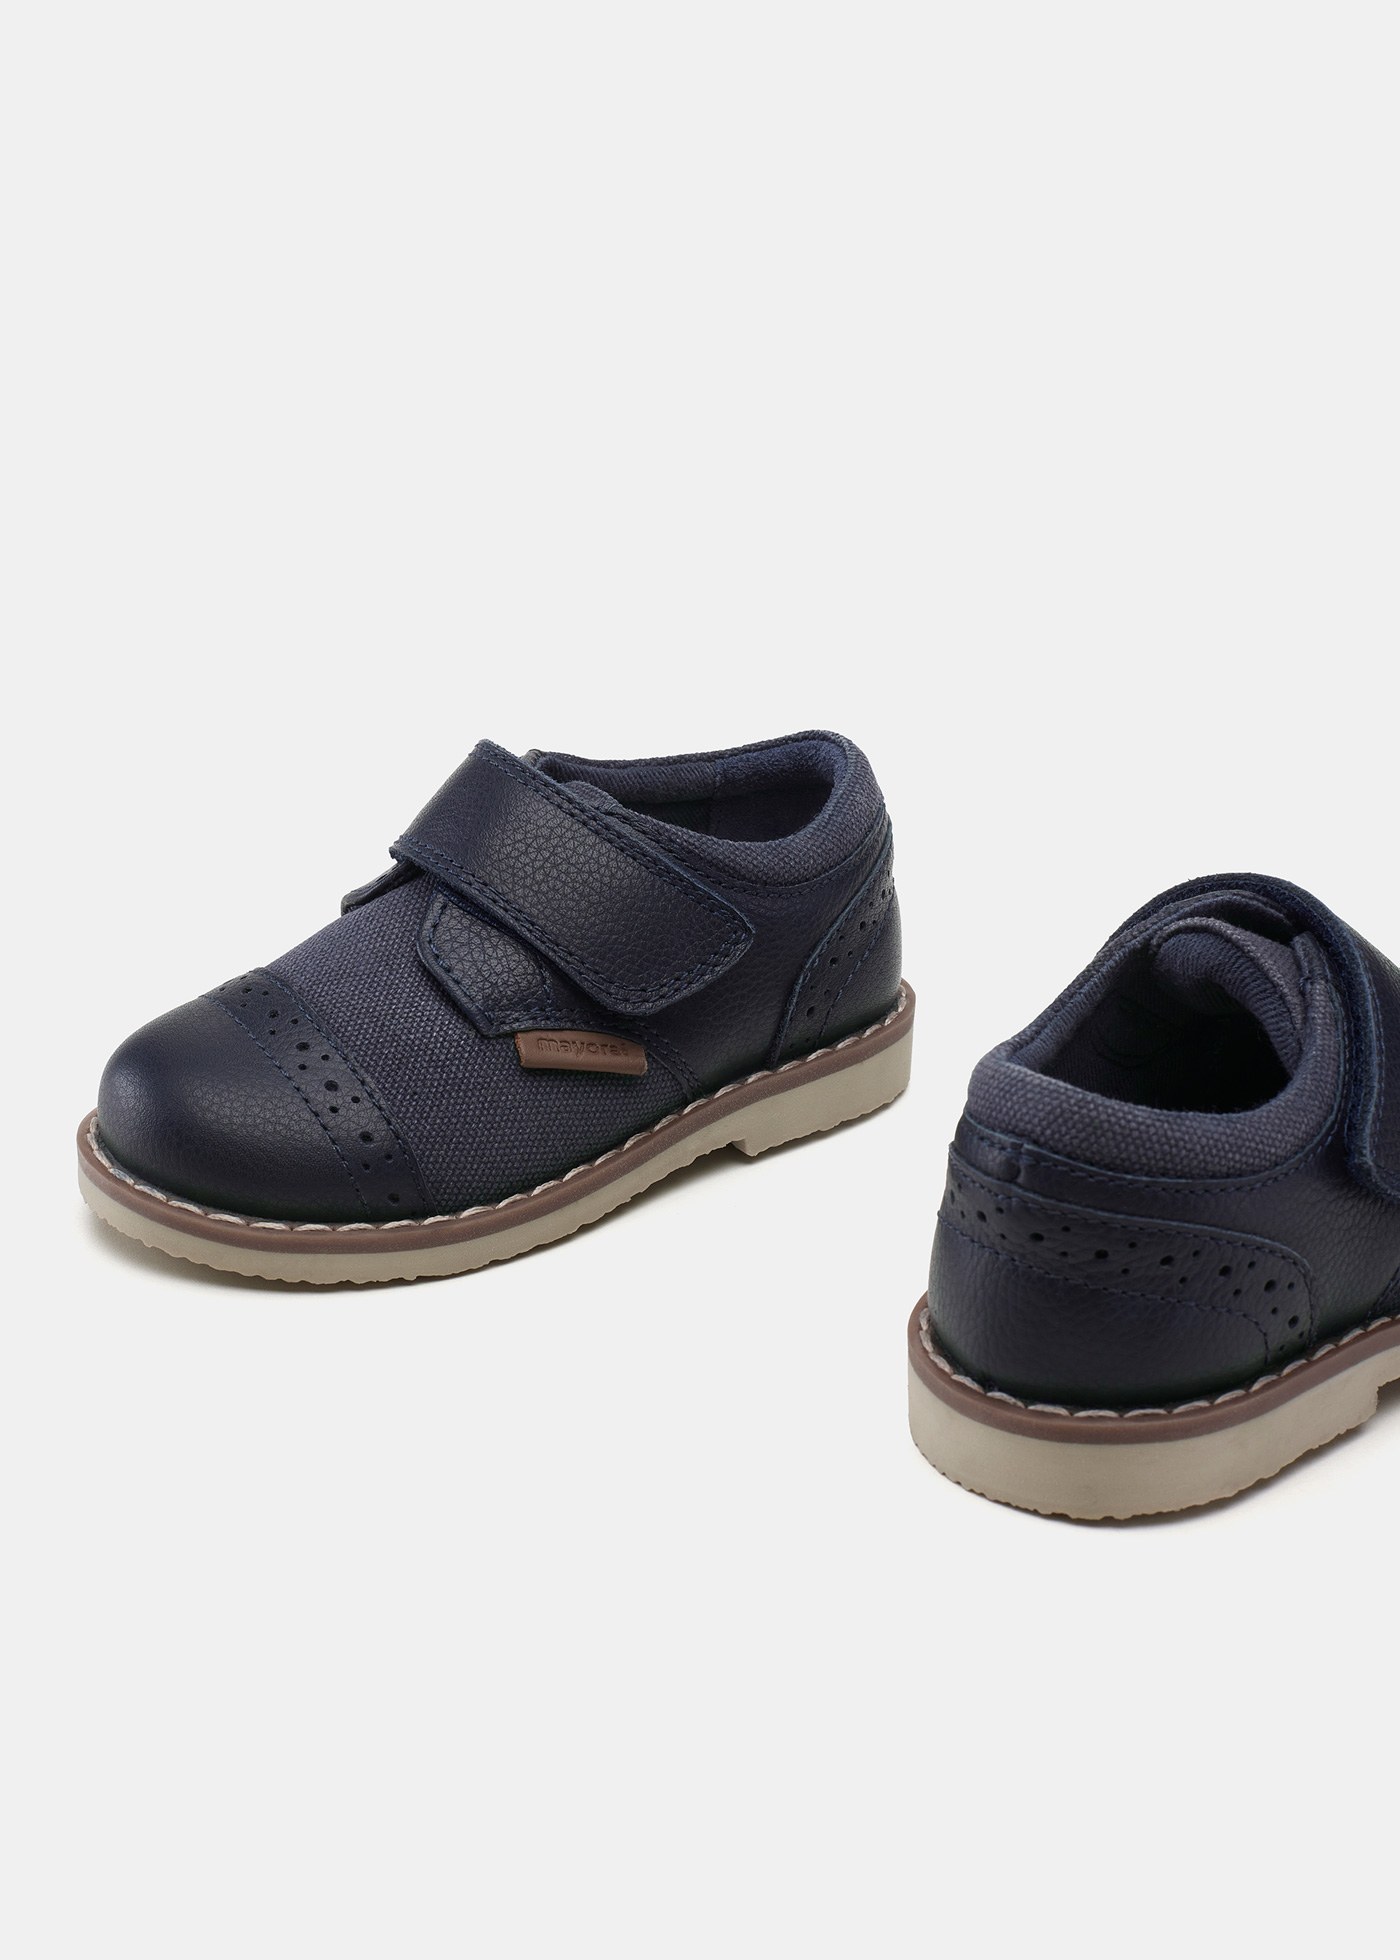 Baby Oxford Shoes Leather